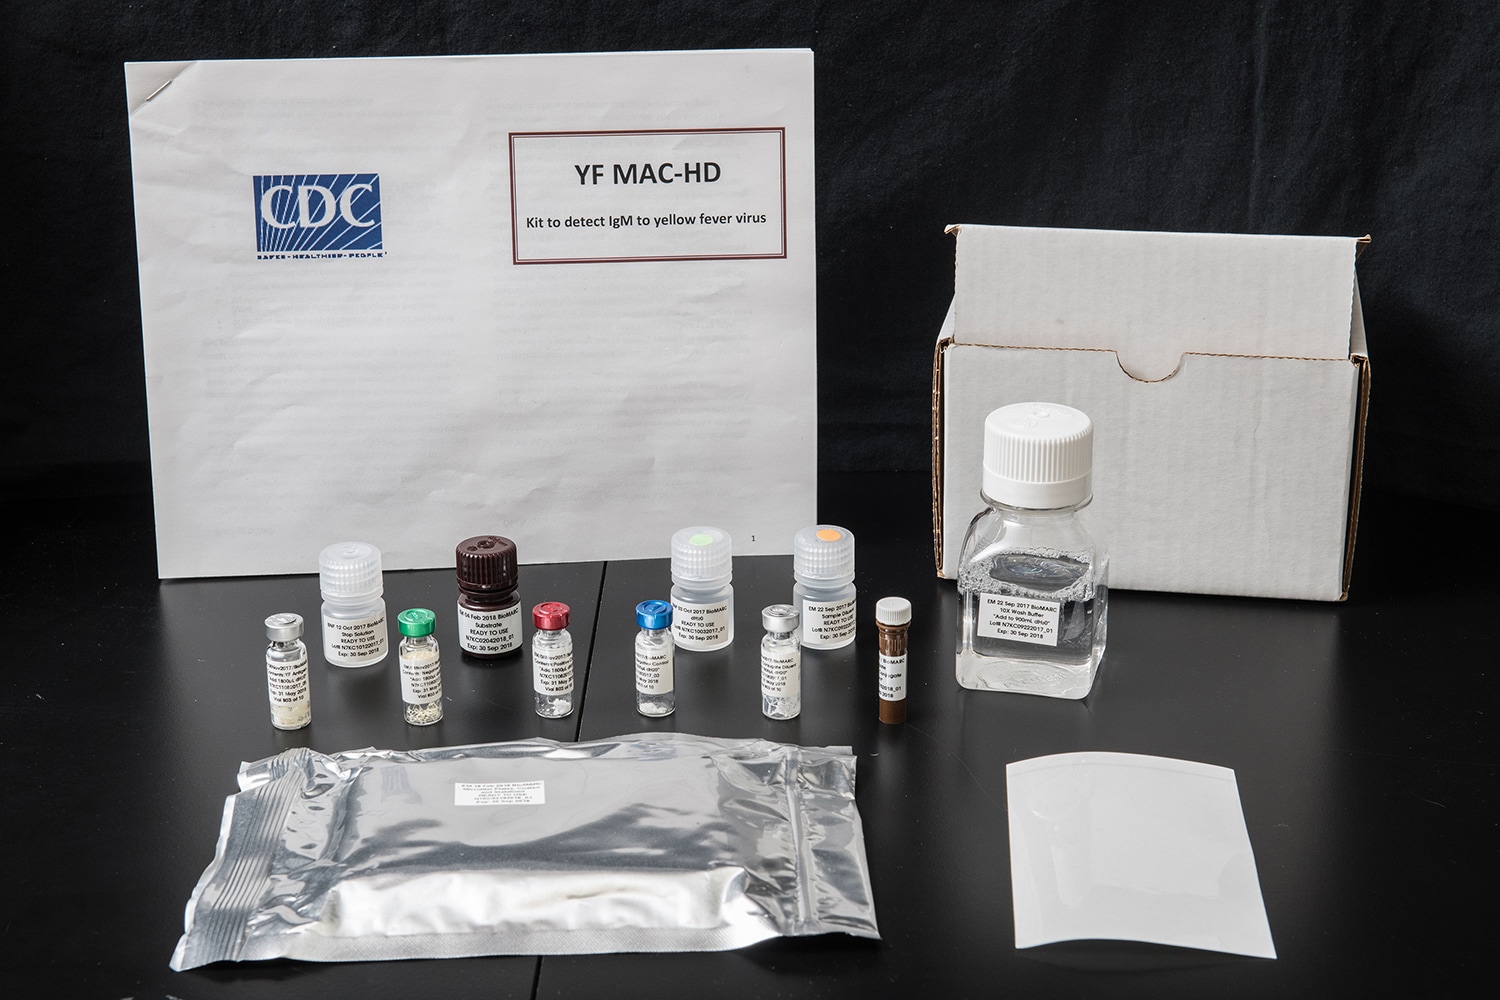 Pre-measured components of the CDC Yellow Fever M-antibody Capture-half Day (YF MAC-HD) diagnostic test kit